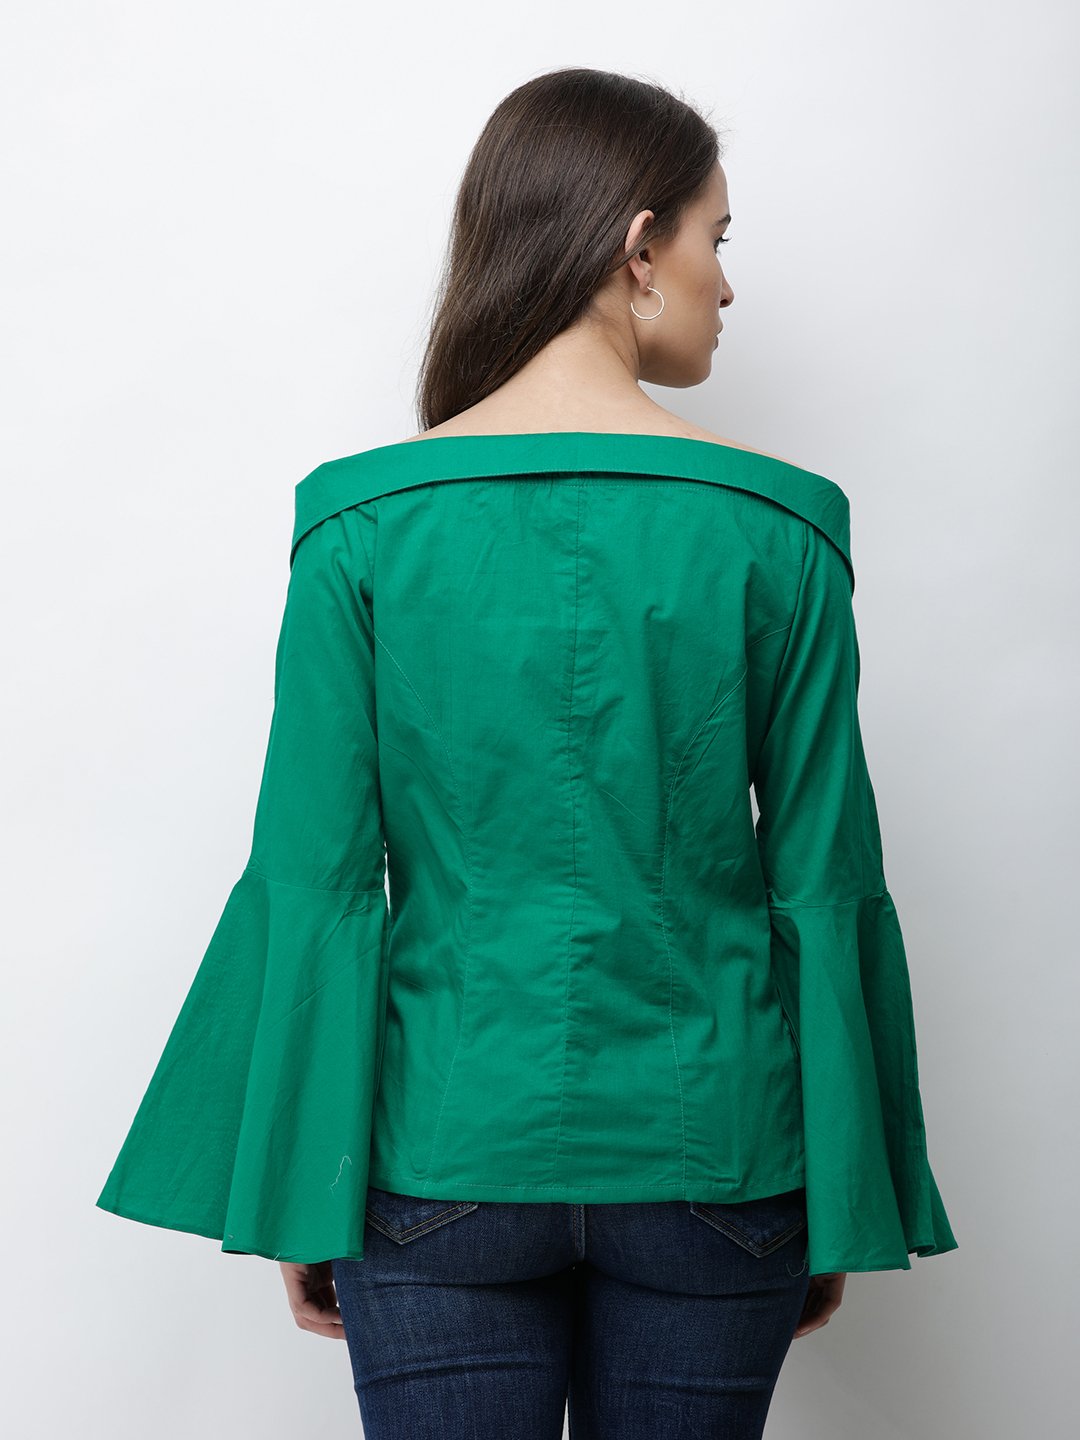 Cation Green Solid Shirt